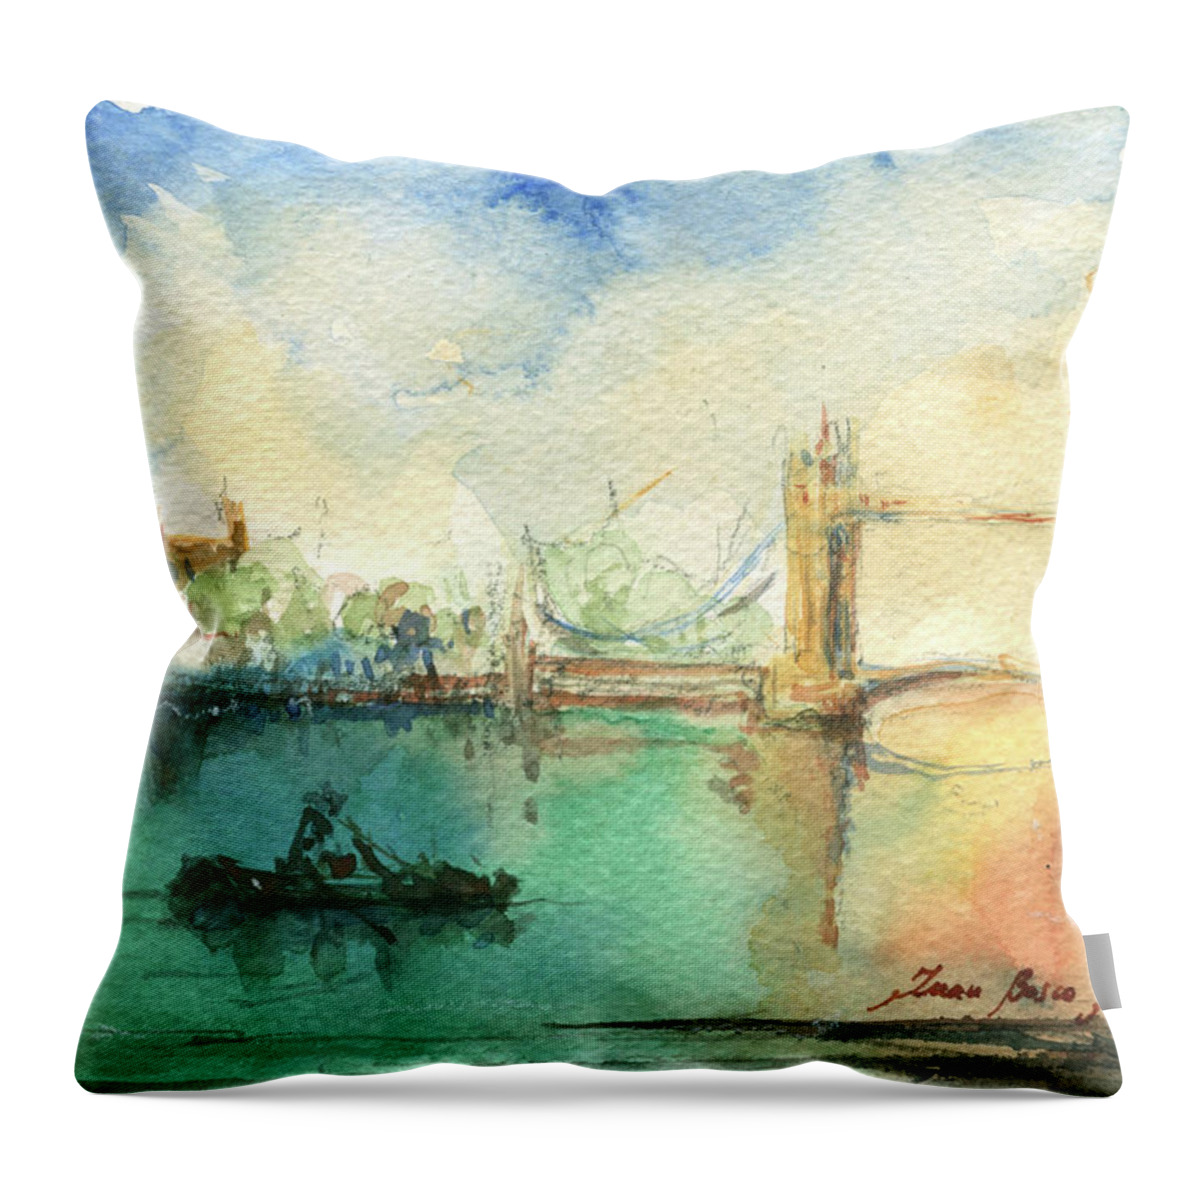 London Decor Throw Pillow featuring the painting London by Juan Bosco